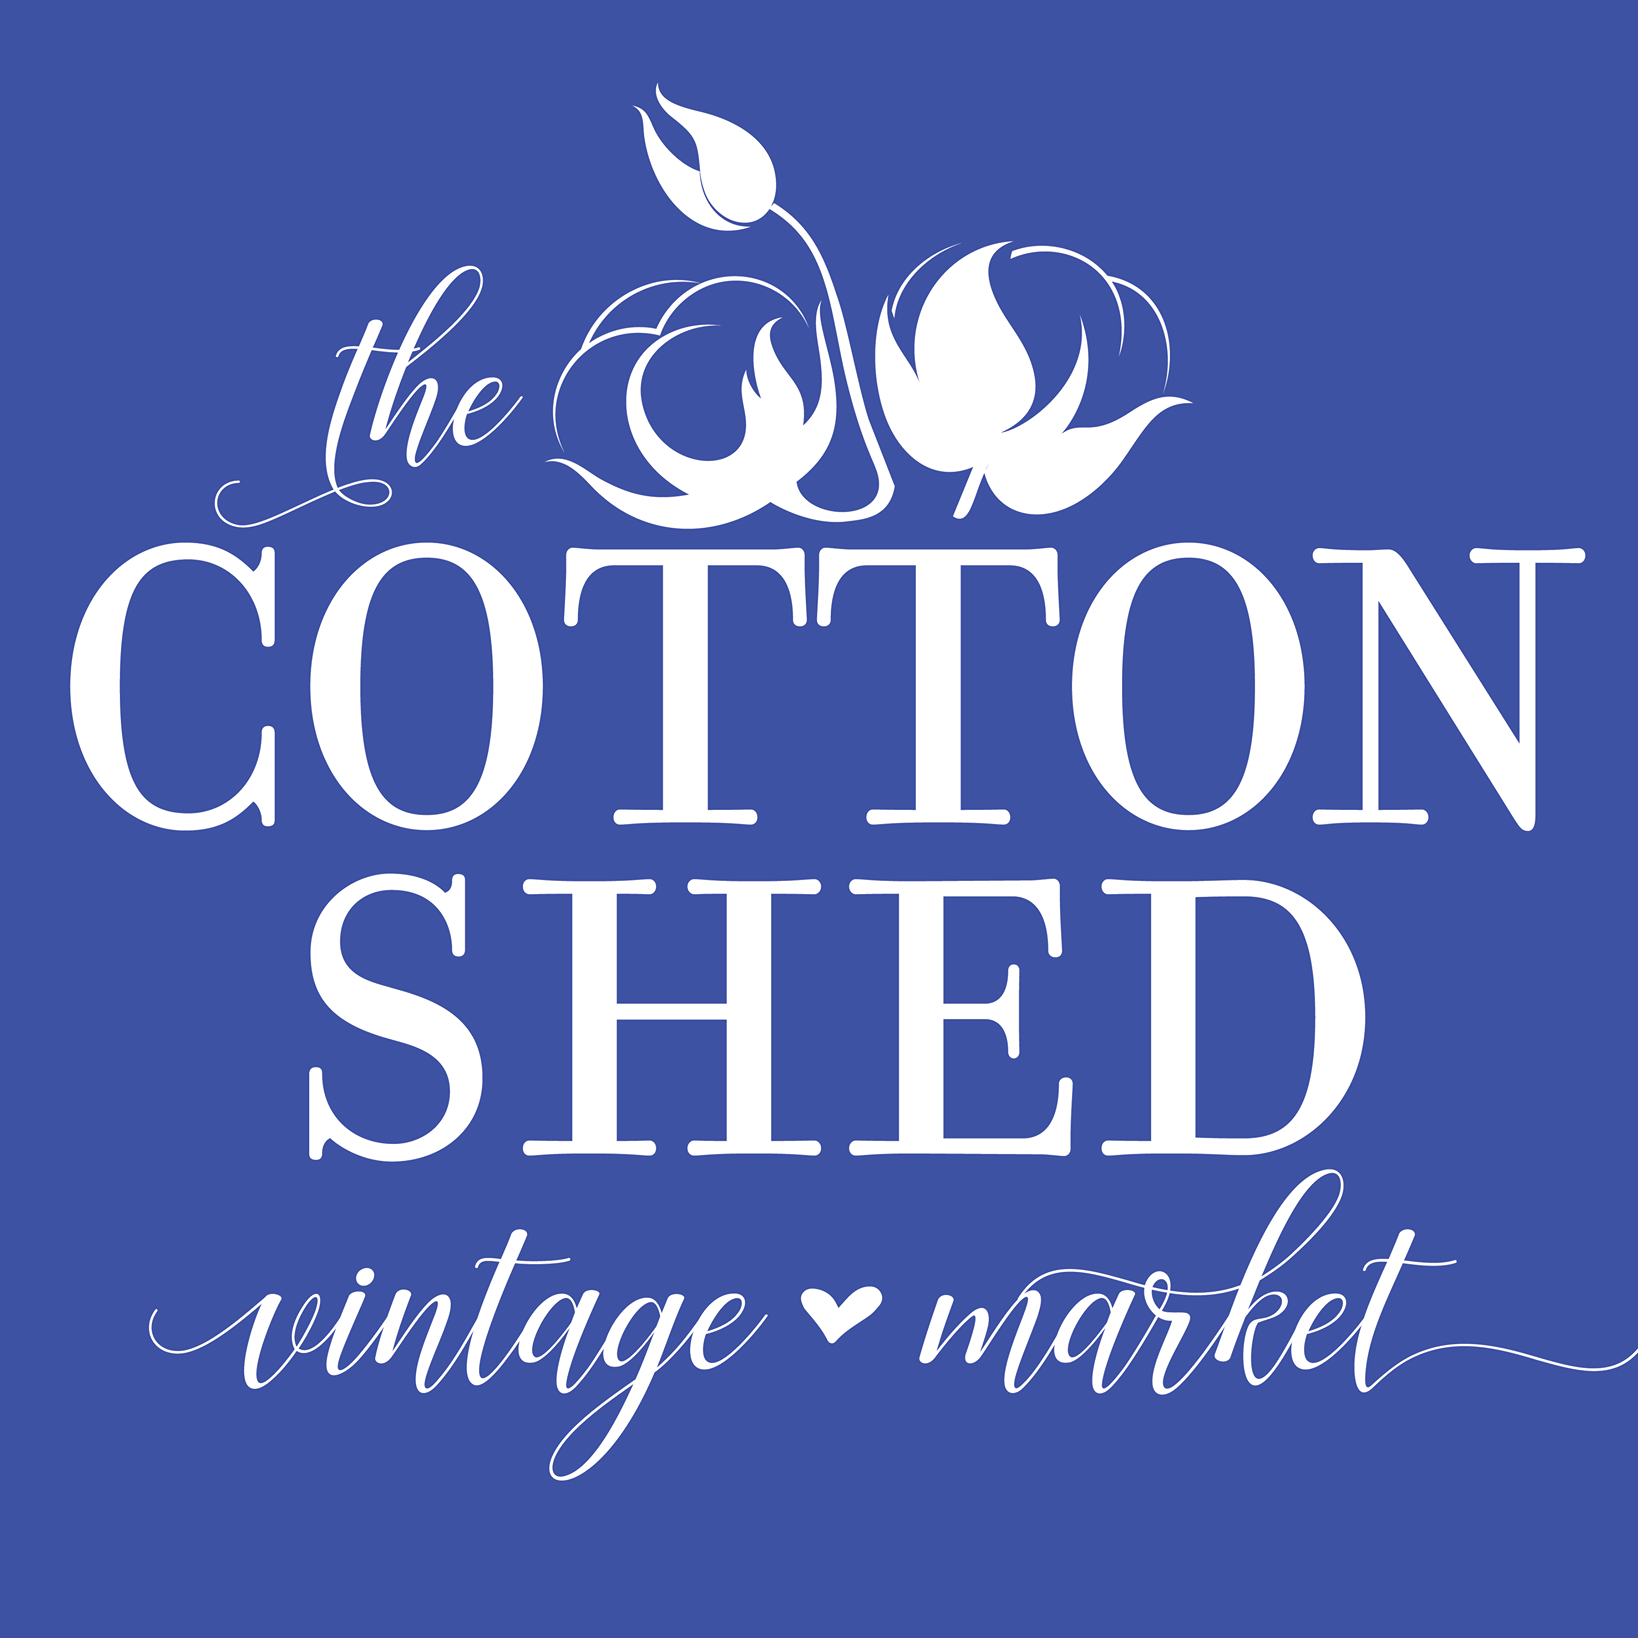 Cotton Shed